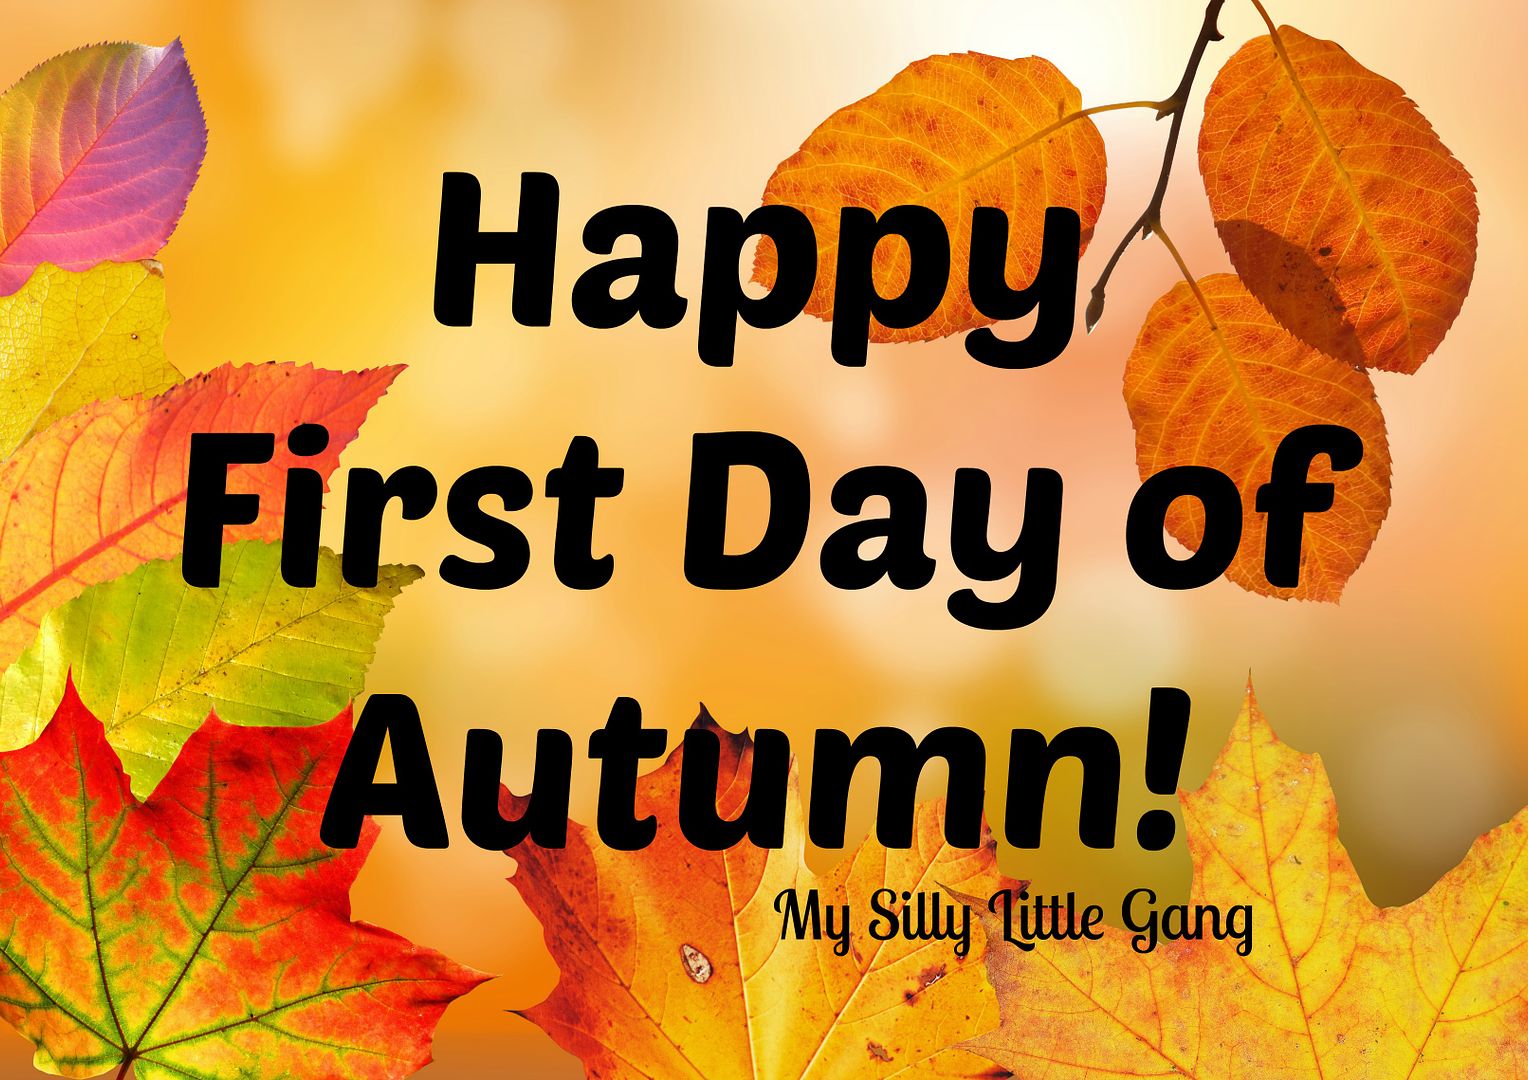 Happy First Day OF Autumn